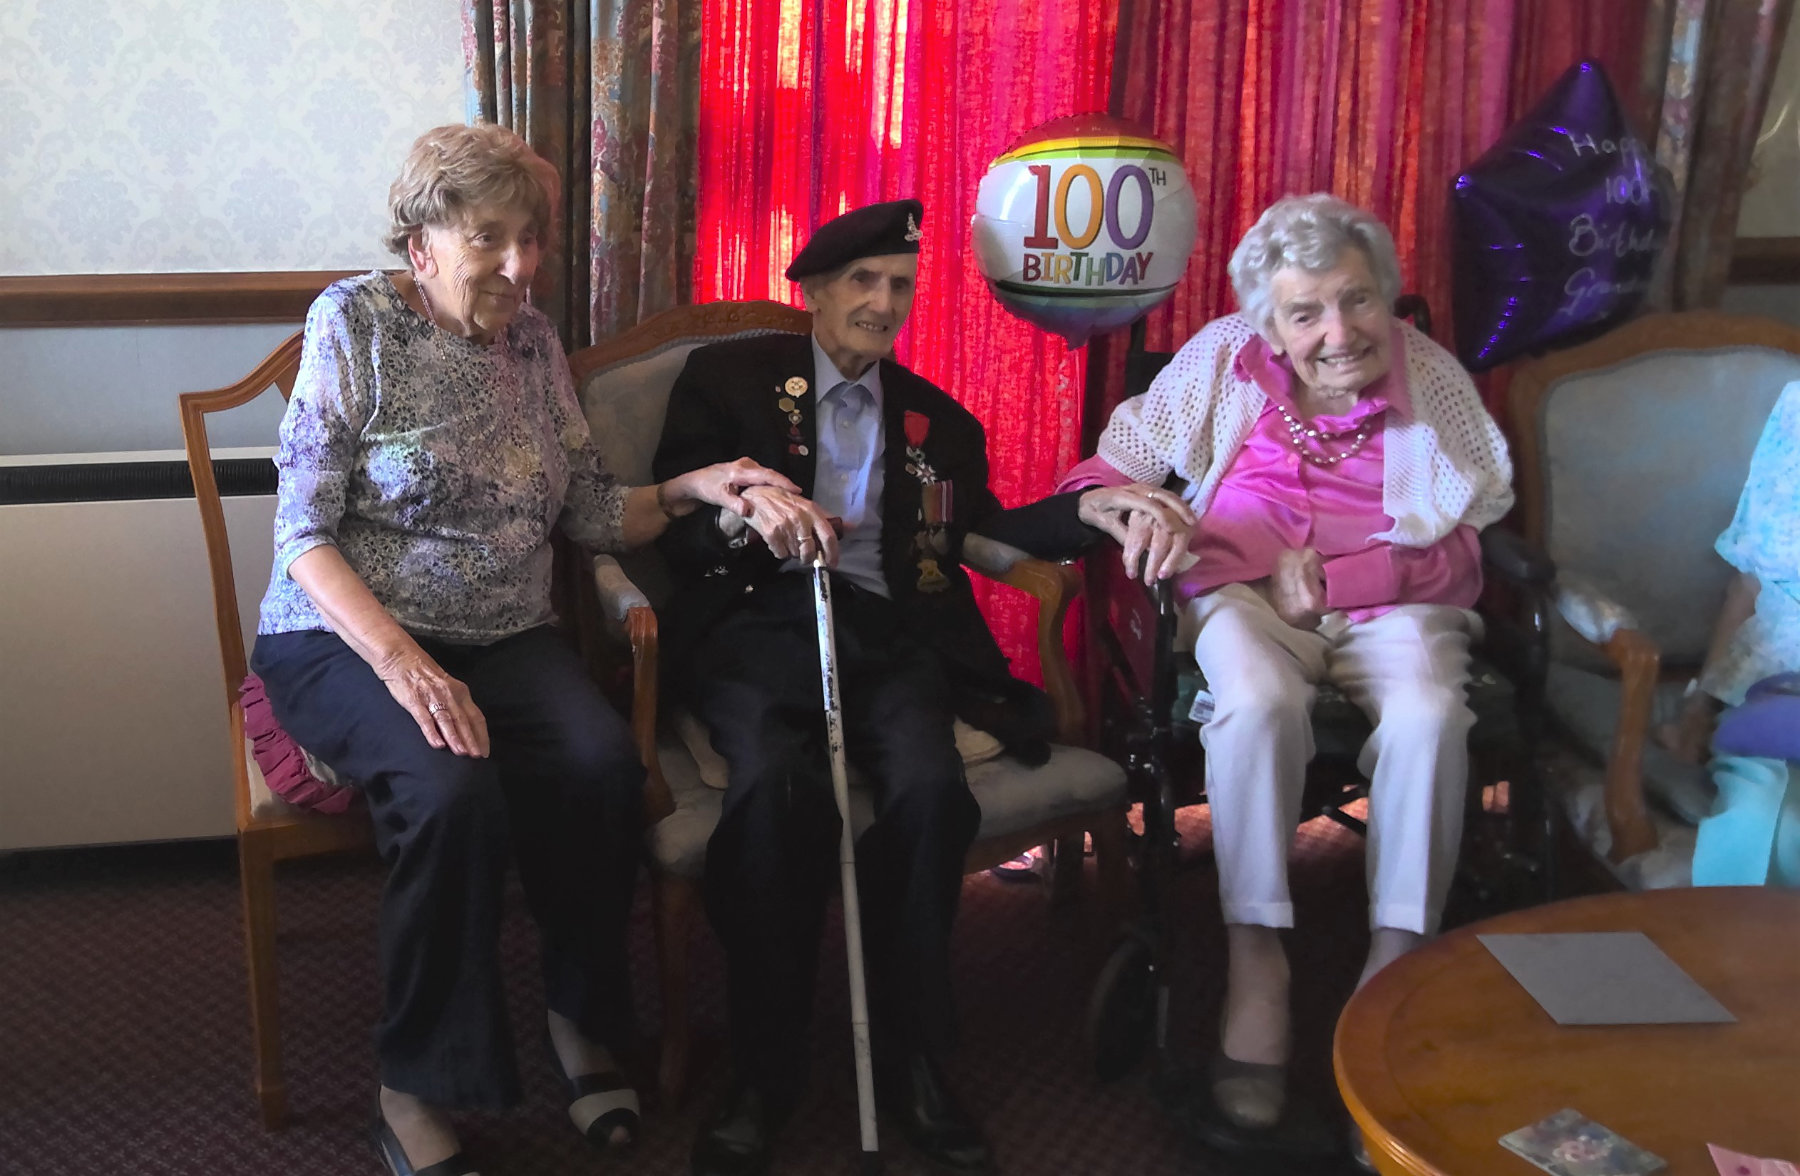 The trio are pictured celebrating Mabel’s birthday in July. From left to right is Ethel, Joe, and Mabel